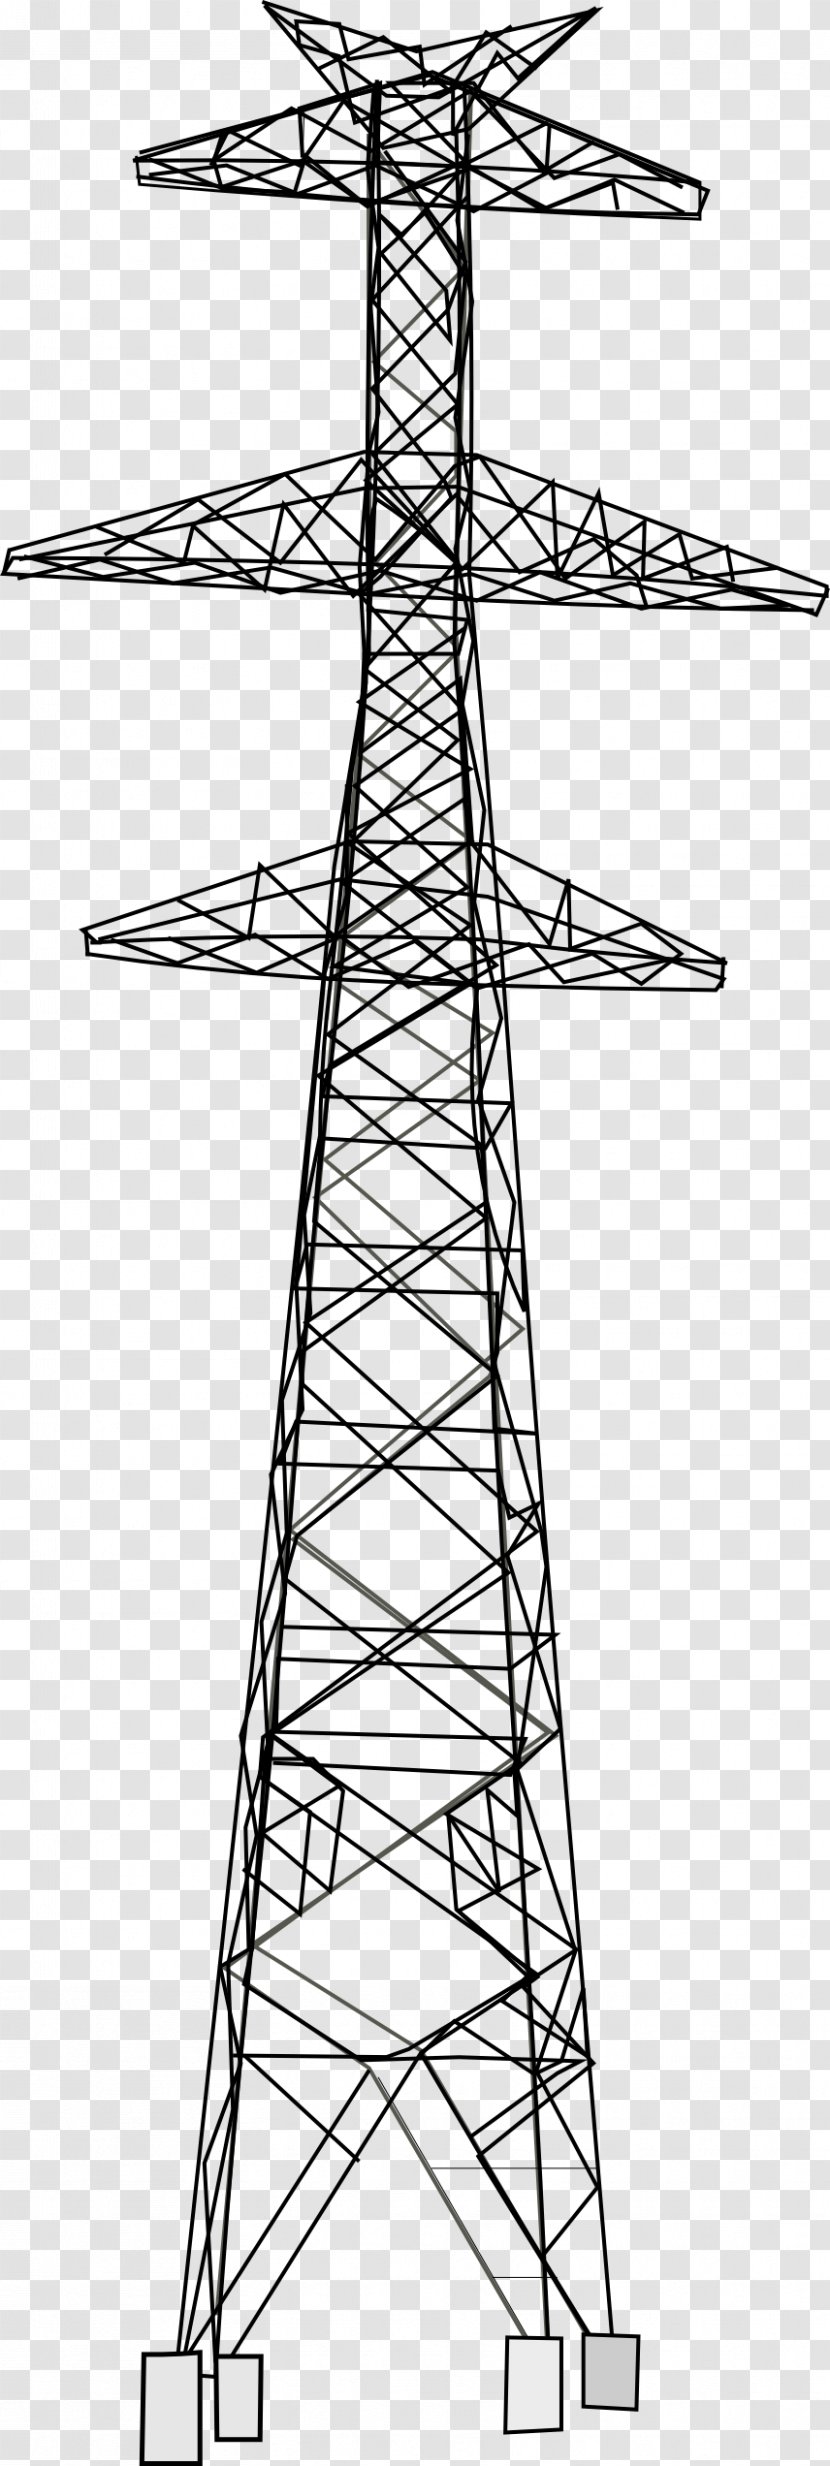 Electricity Overhead Power Line High Voltage Transmission Tower Insulator Transparent PNG